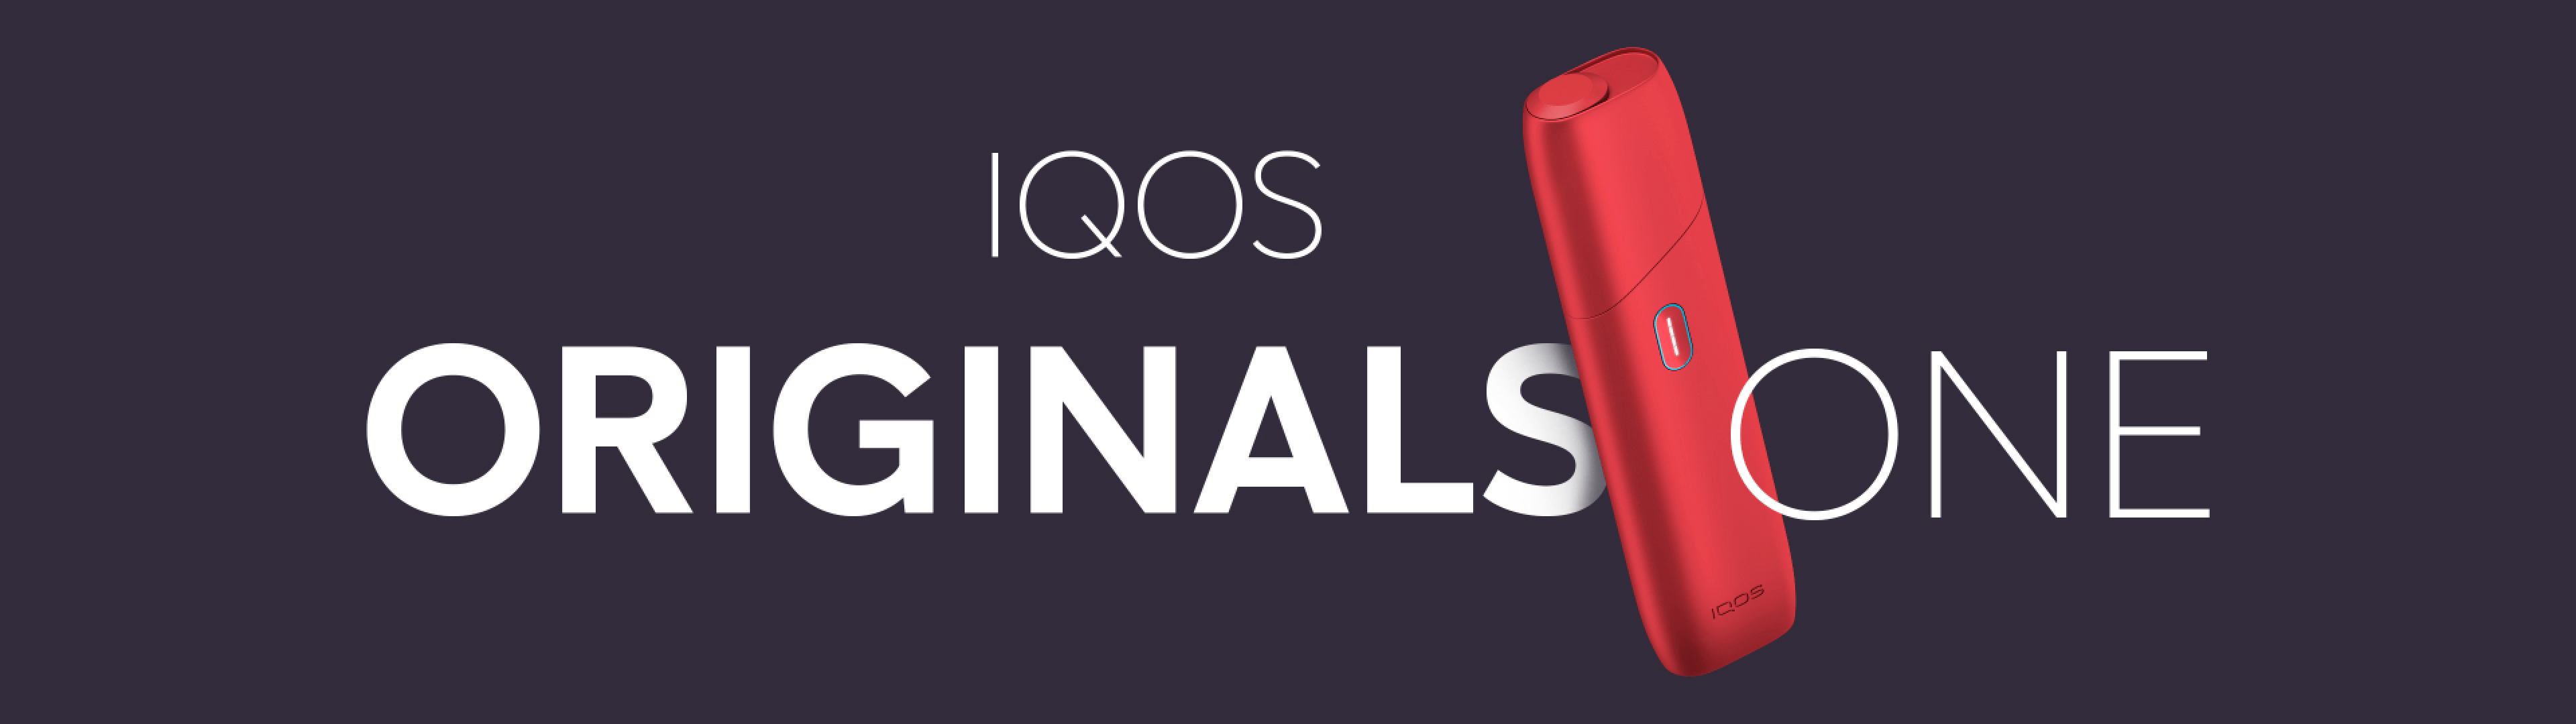 New IQOS Originals One banner and heated tobacco device in red color.